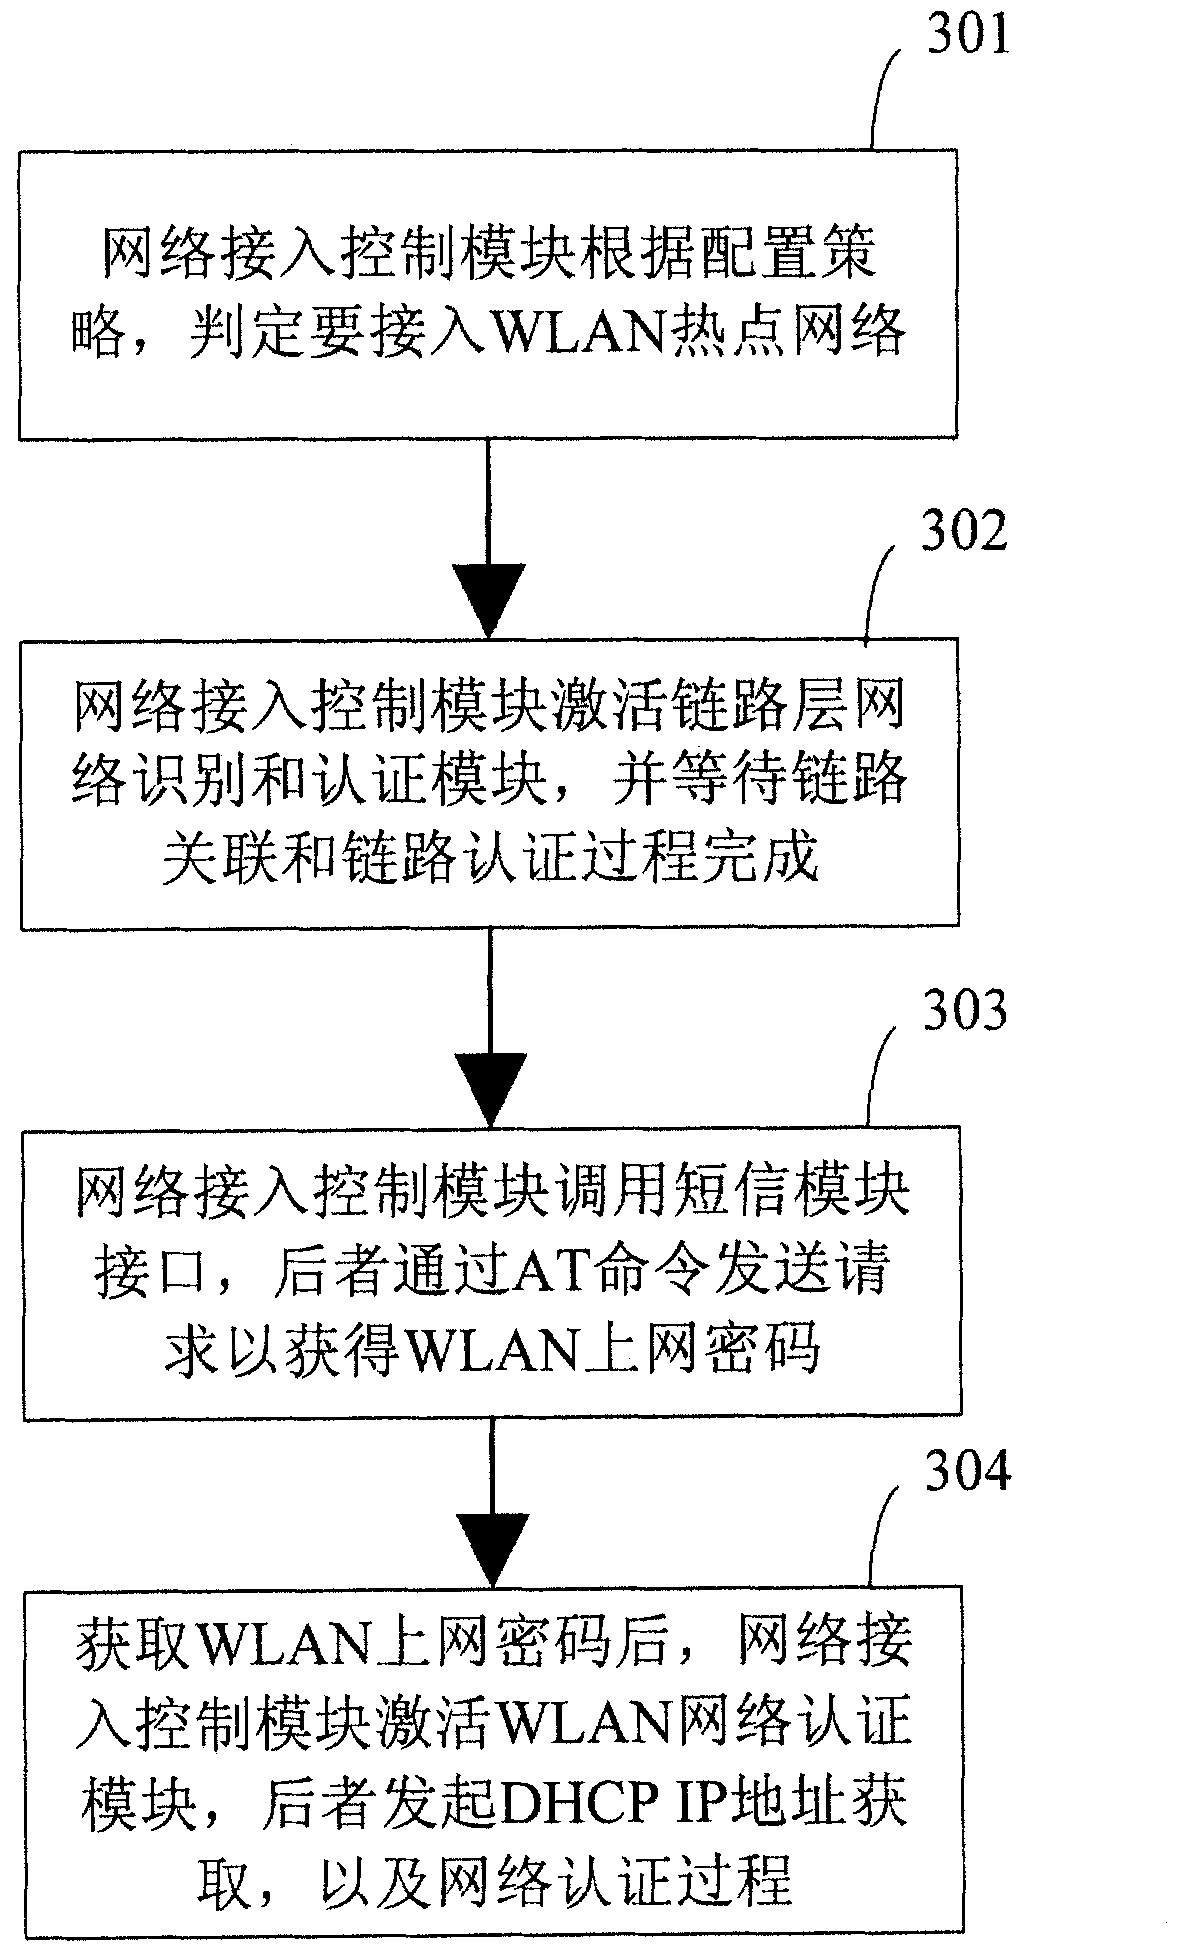 Method and system for accessing wireless network into user residential gateway